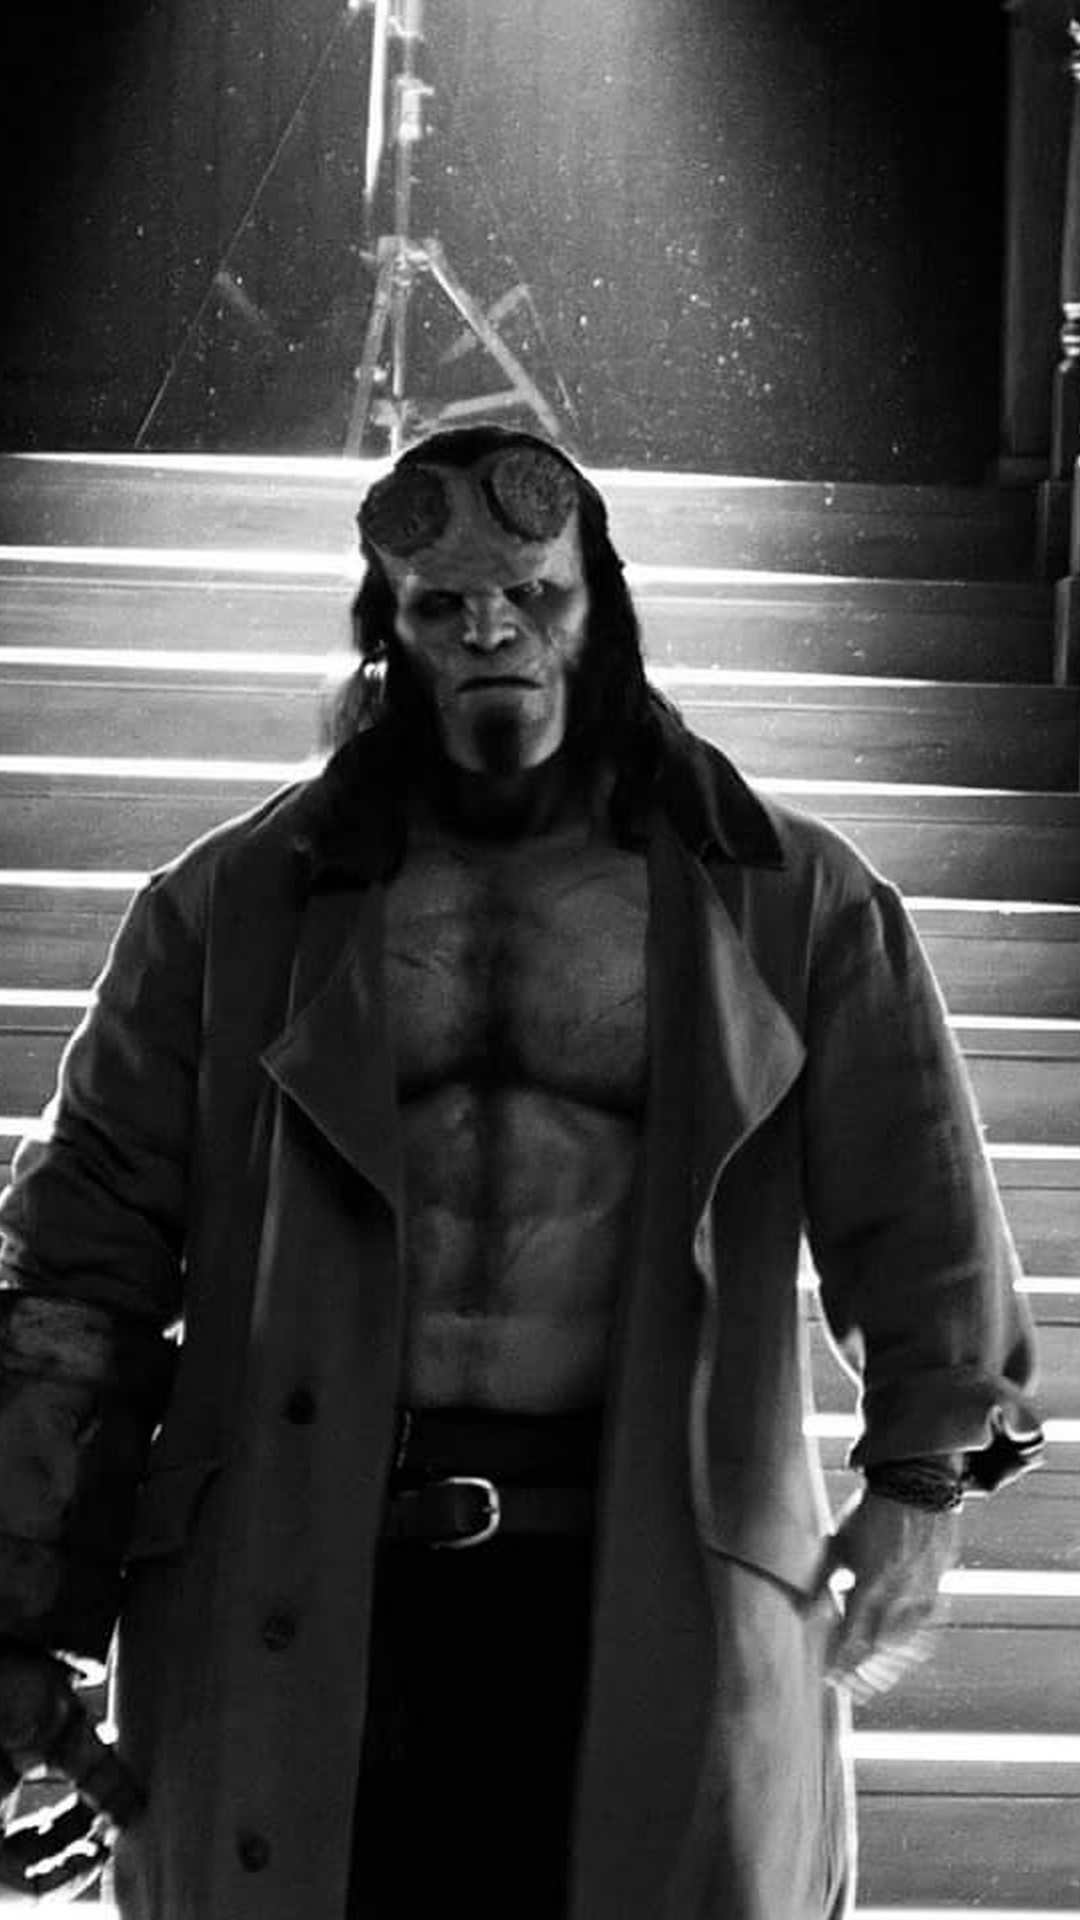 Hellboy 2019 Android Wallpaper with high-resolution 1080x1920 pixel. You can use this wallpaper for your Android backgrounds, Tablet, Samsung Screensavers, Mobile Phone Lock Screen and another Smartphones device